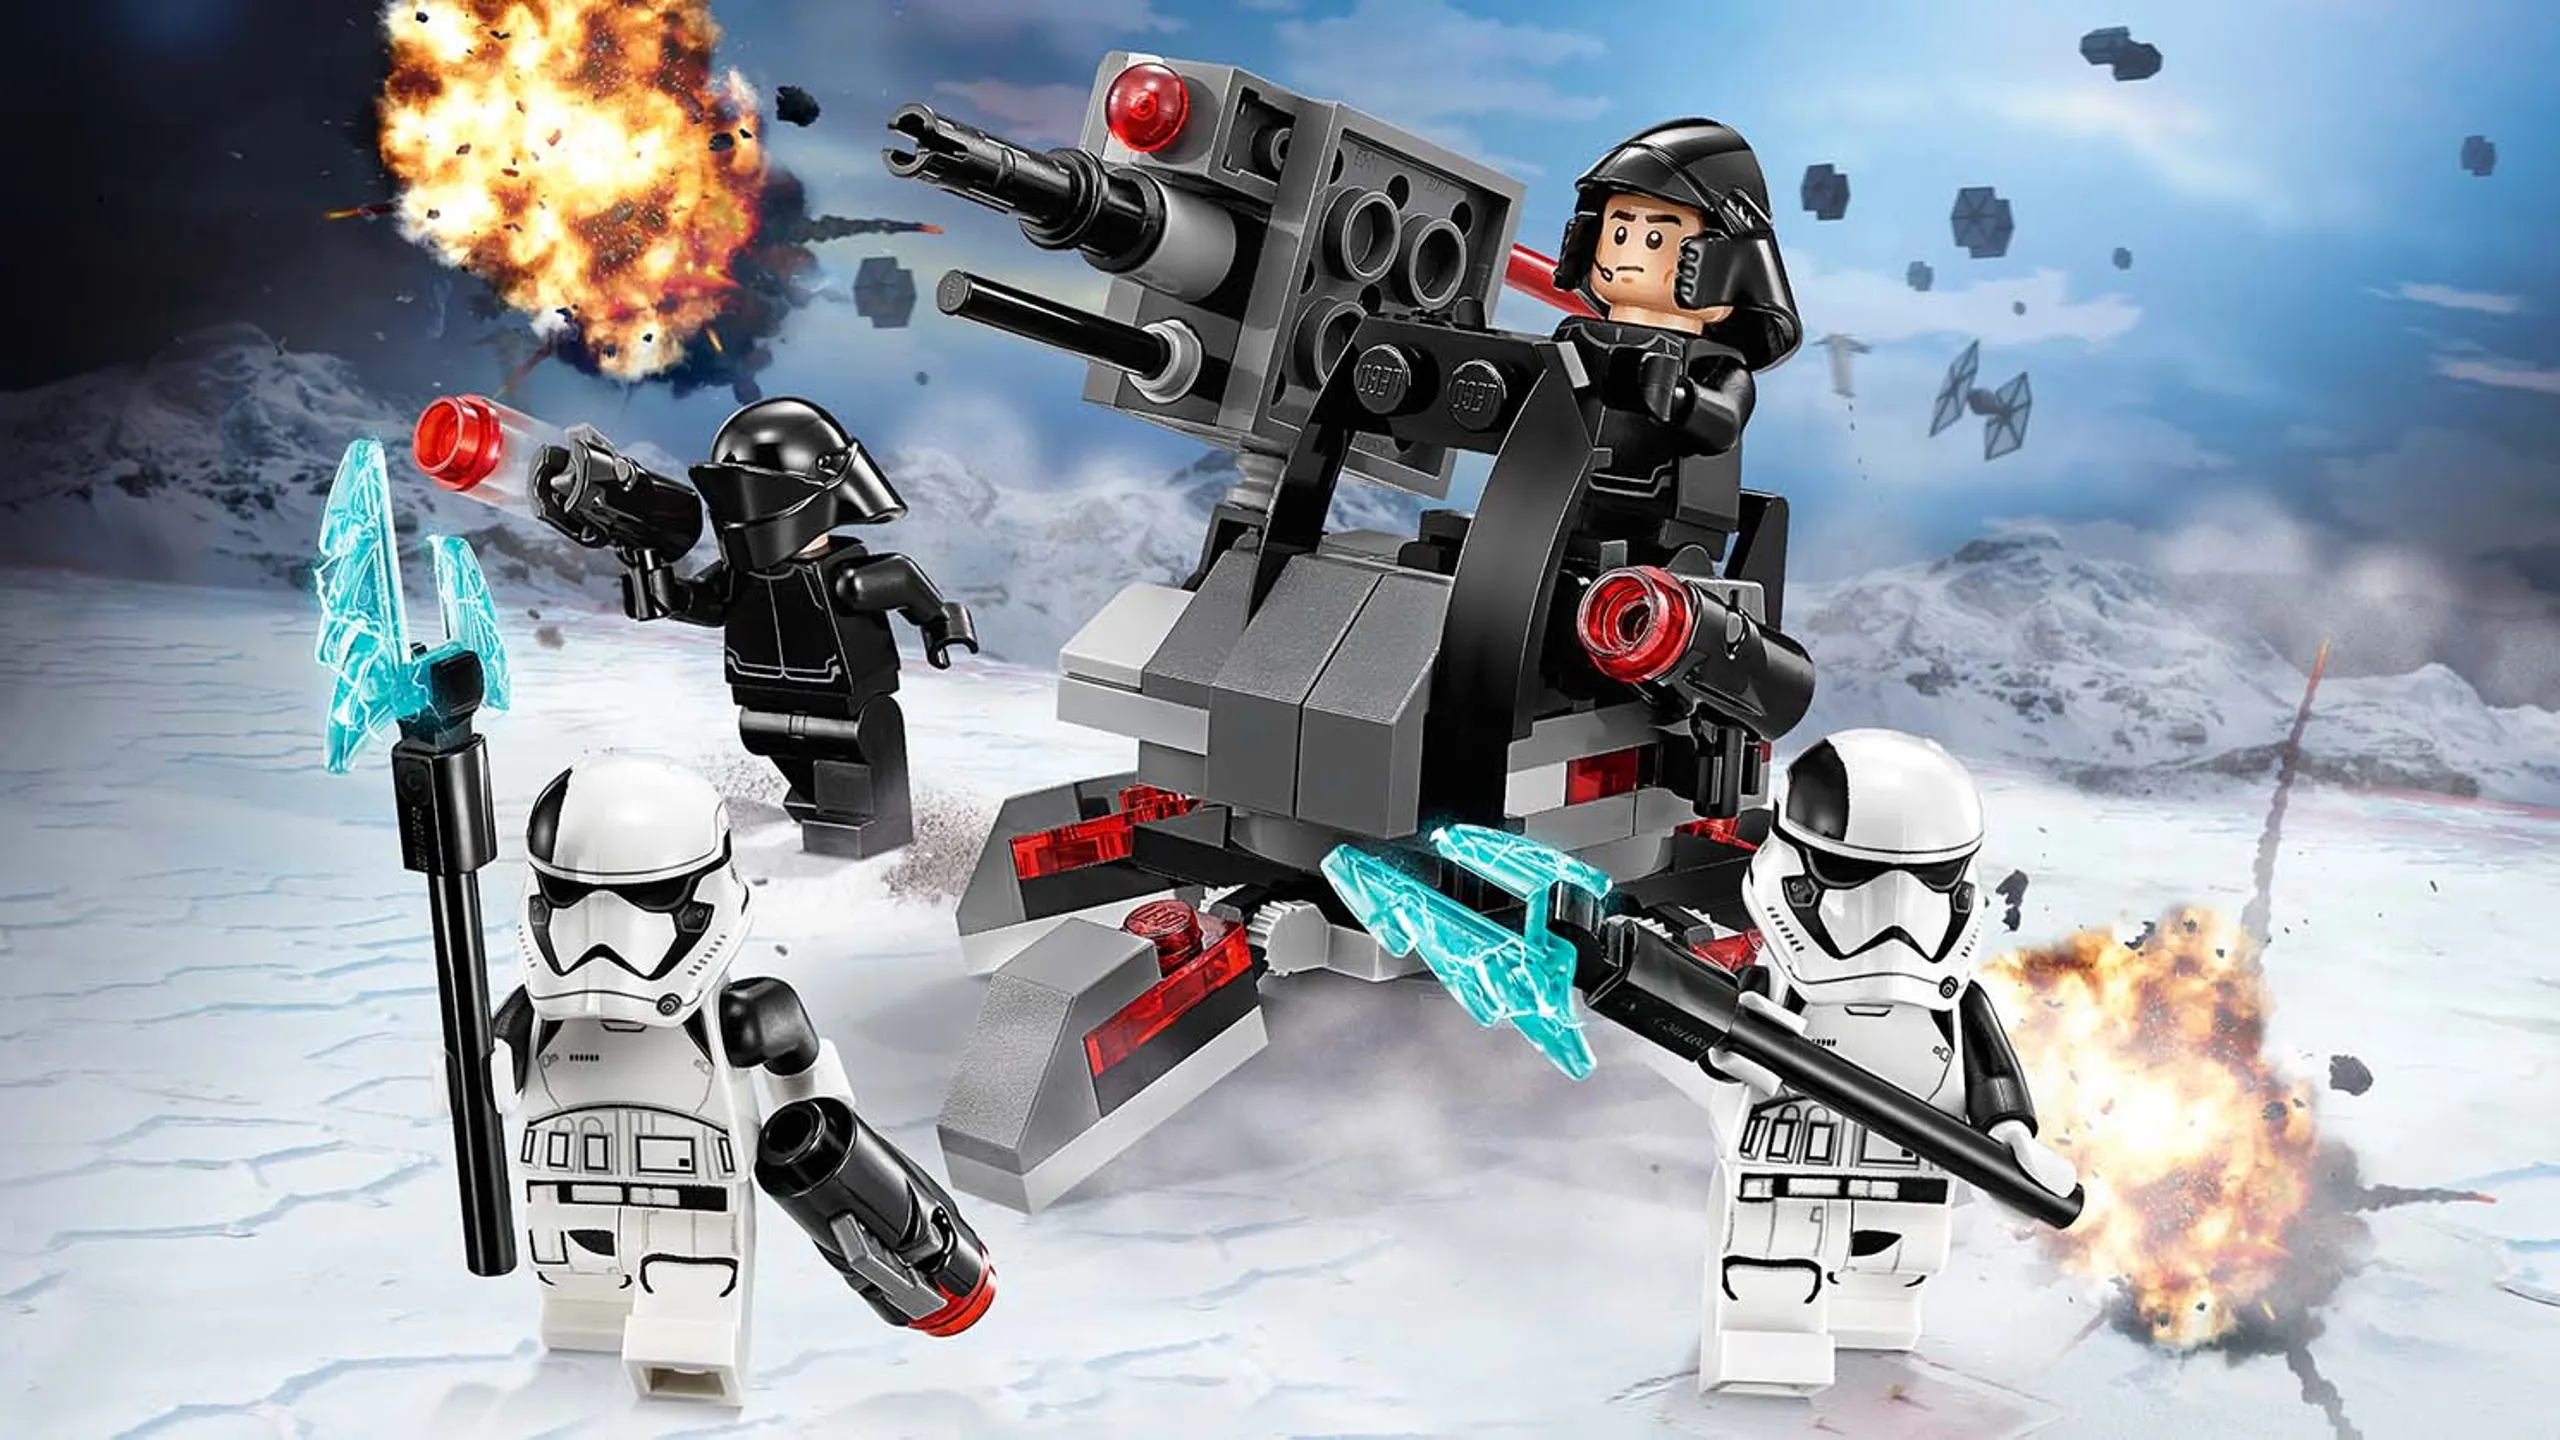 LEGO Star Wars First Order Specialists Battle Pack - 75197 - An army of Stormtroopers led by The First Order Gunner is going into battle.